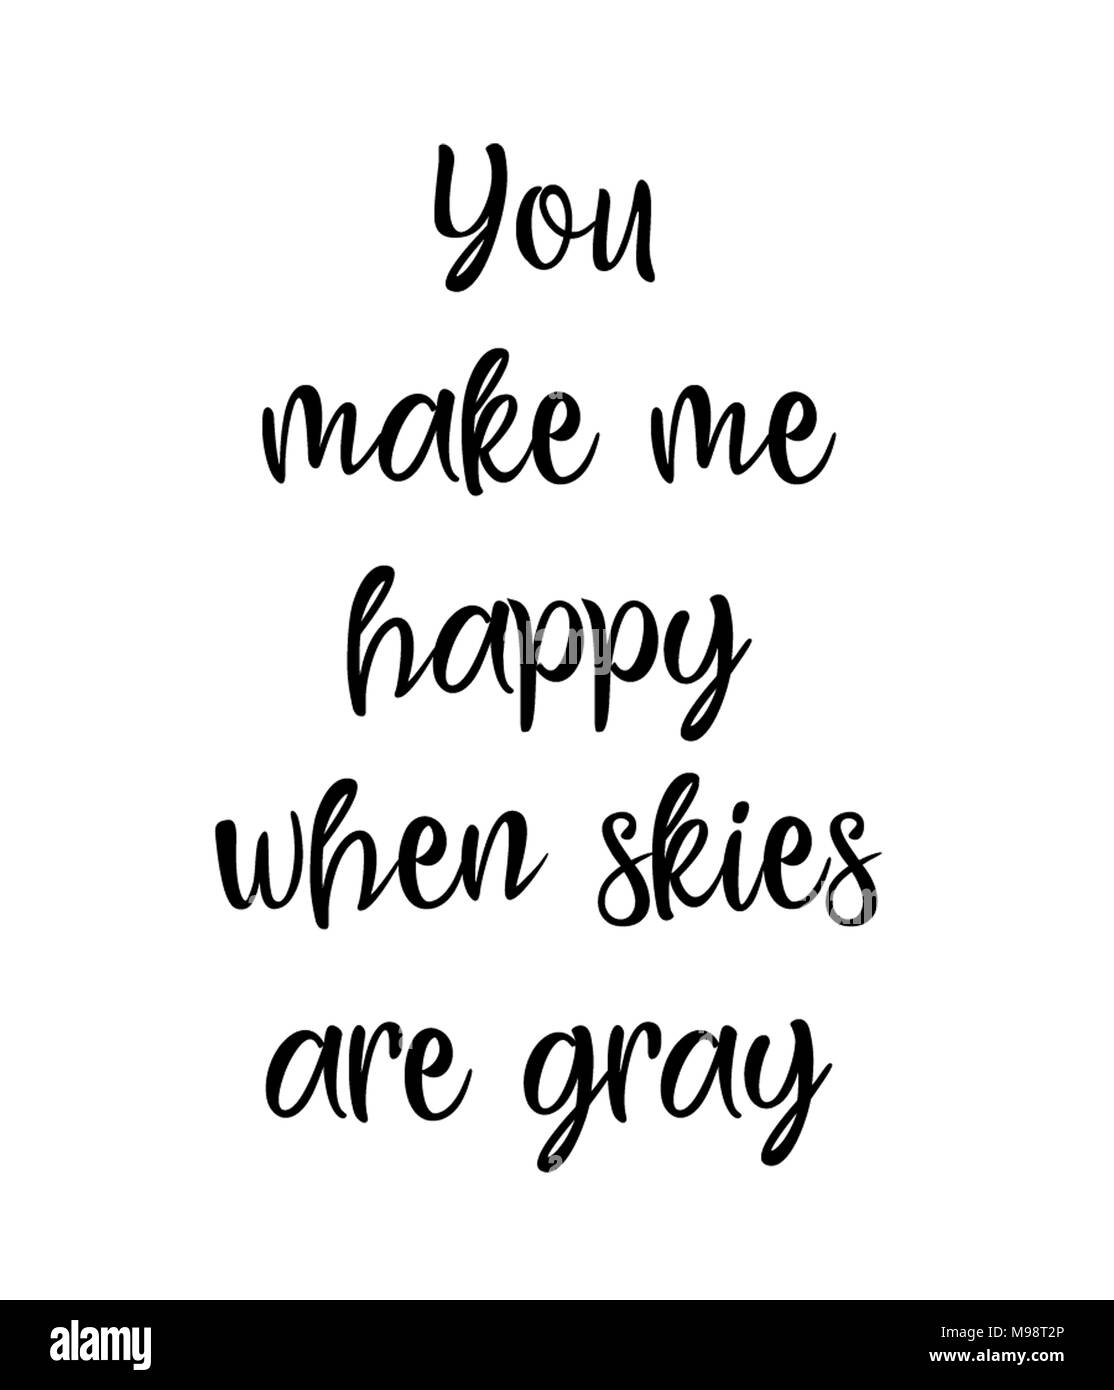 You make me happy when skies are gray. Stock Photo